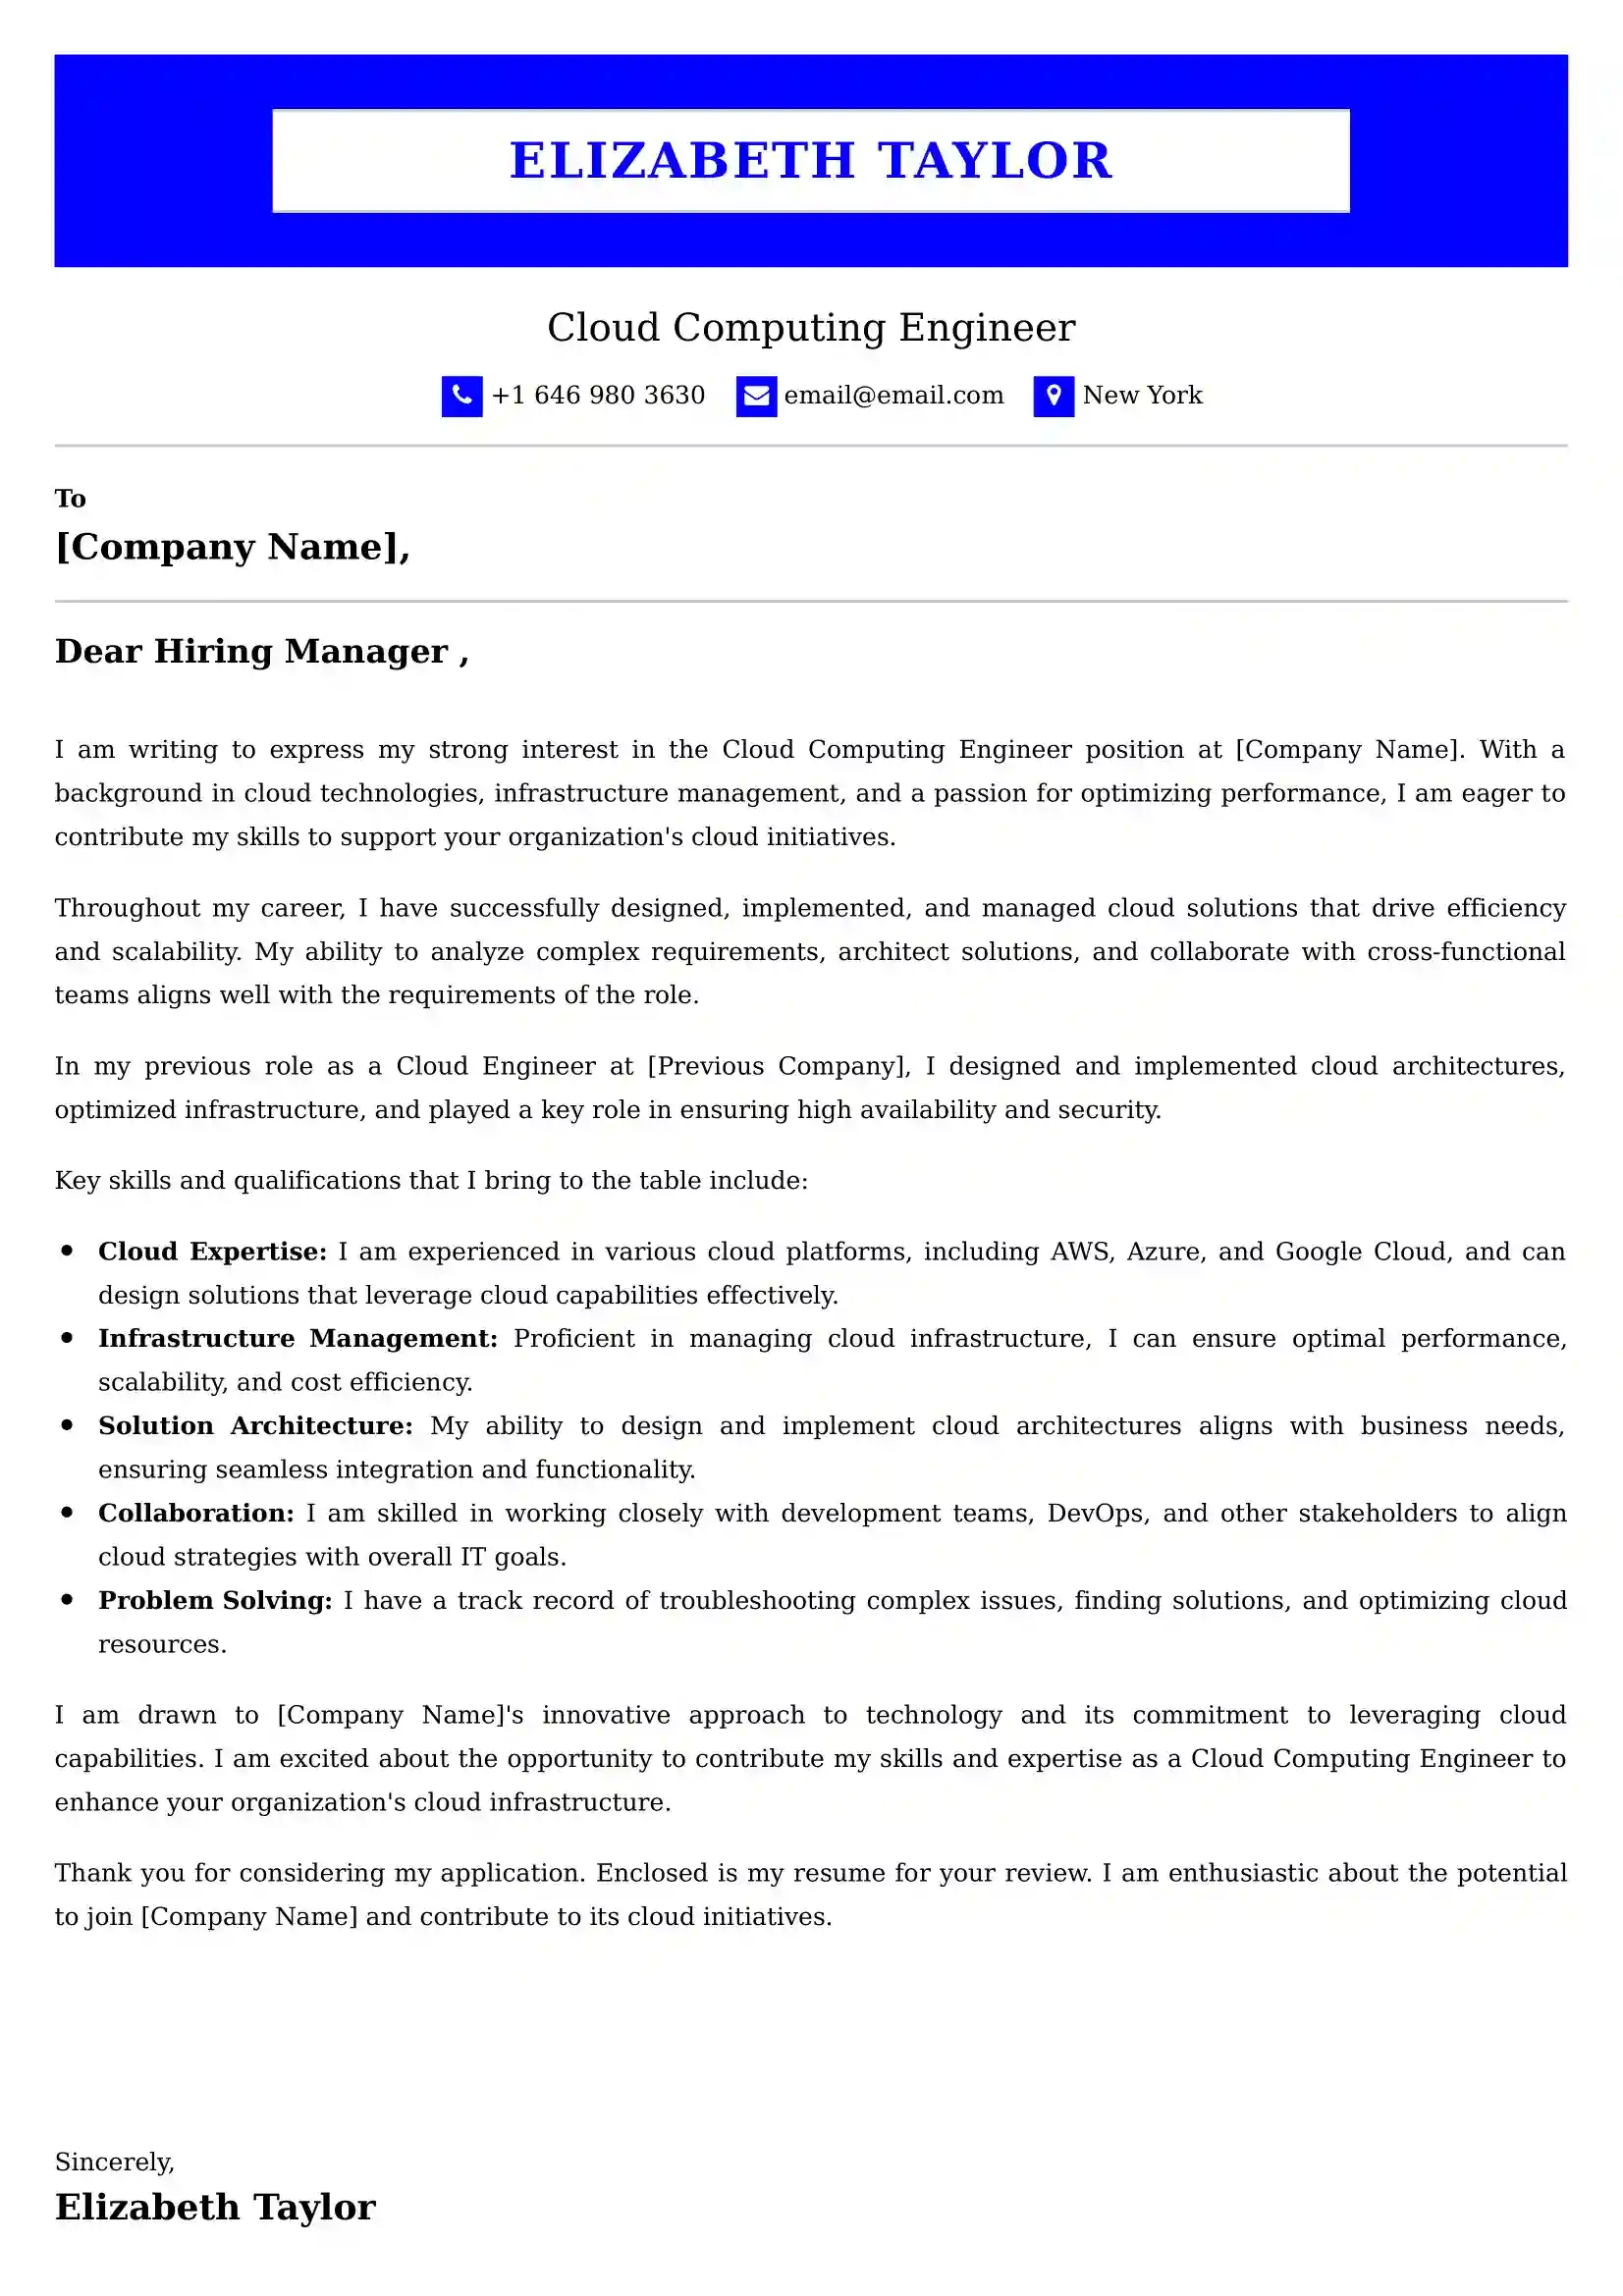 Cloud Computing Engineer Cover Letter Examples UK - Tips and Guide